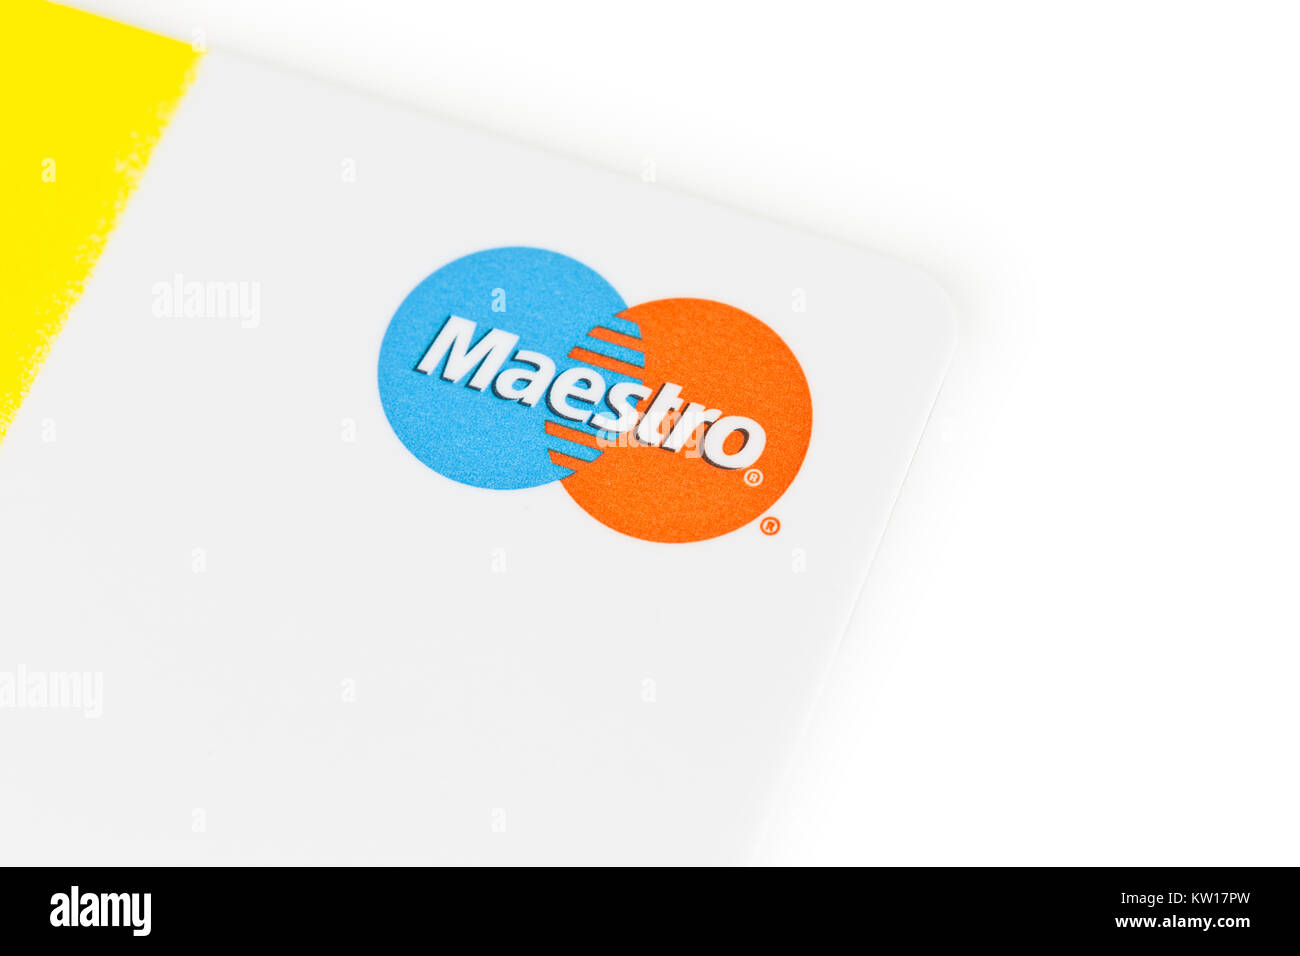 Detail of a maestro card Stock Photo